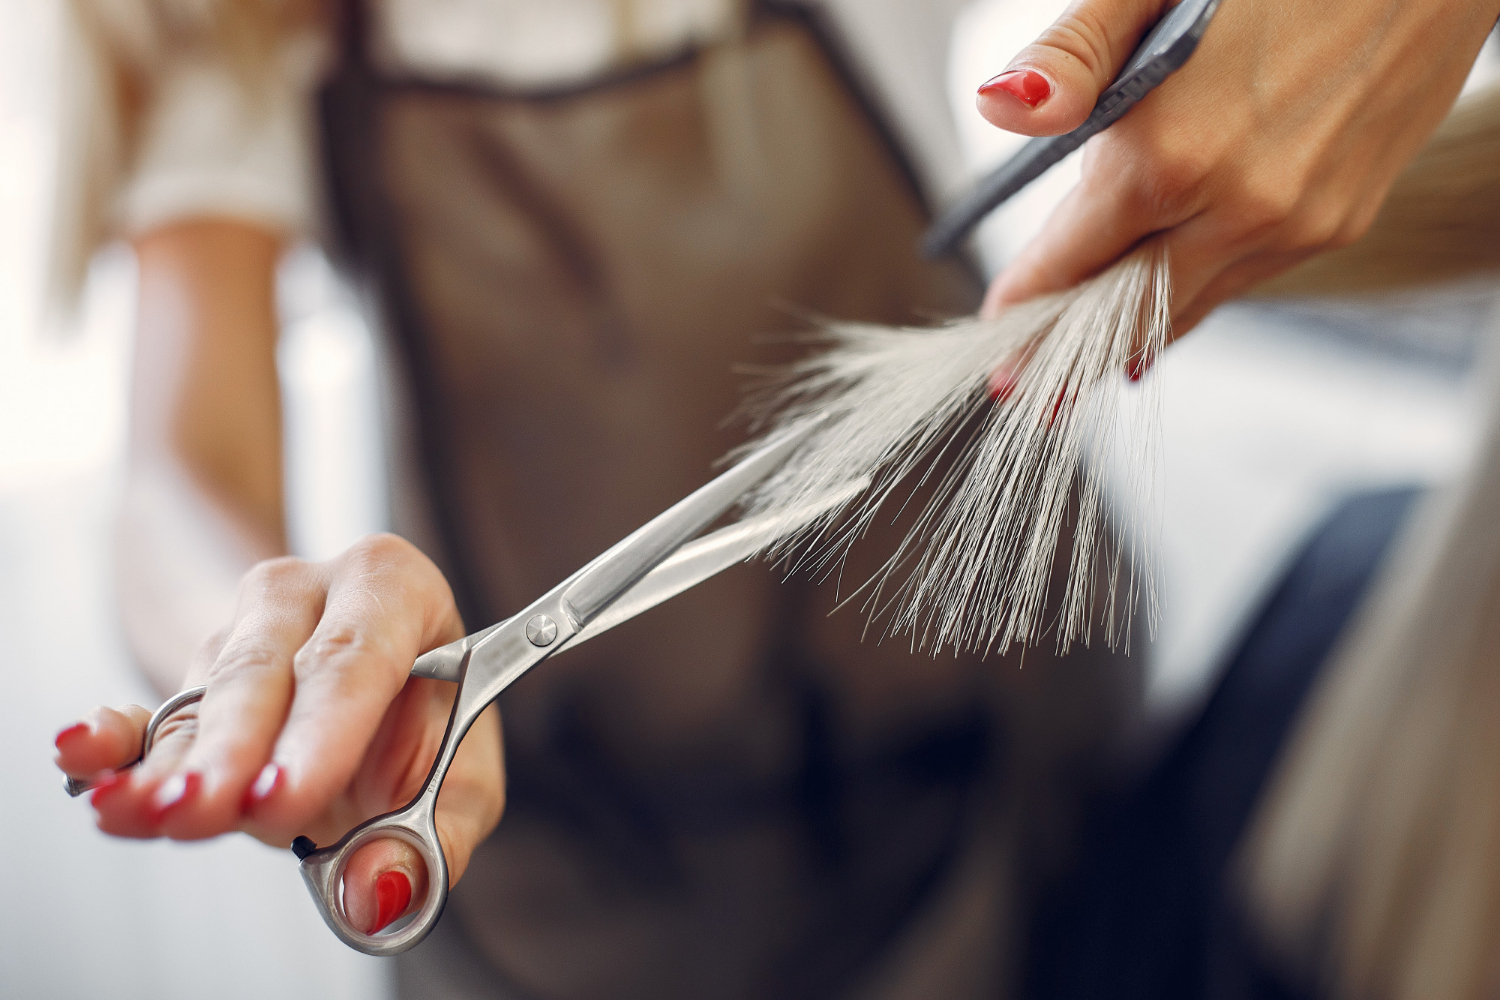 Study Reveals Risk of Ovarian Cancer Higher in Hairdressers